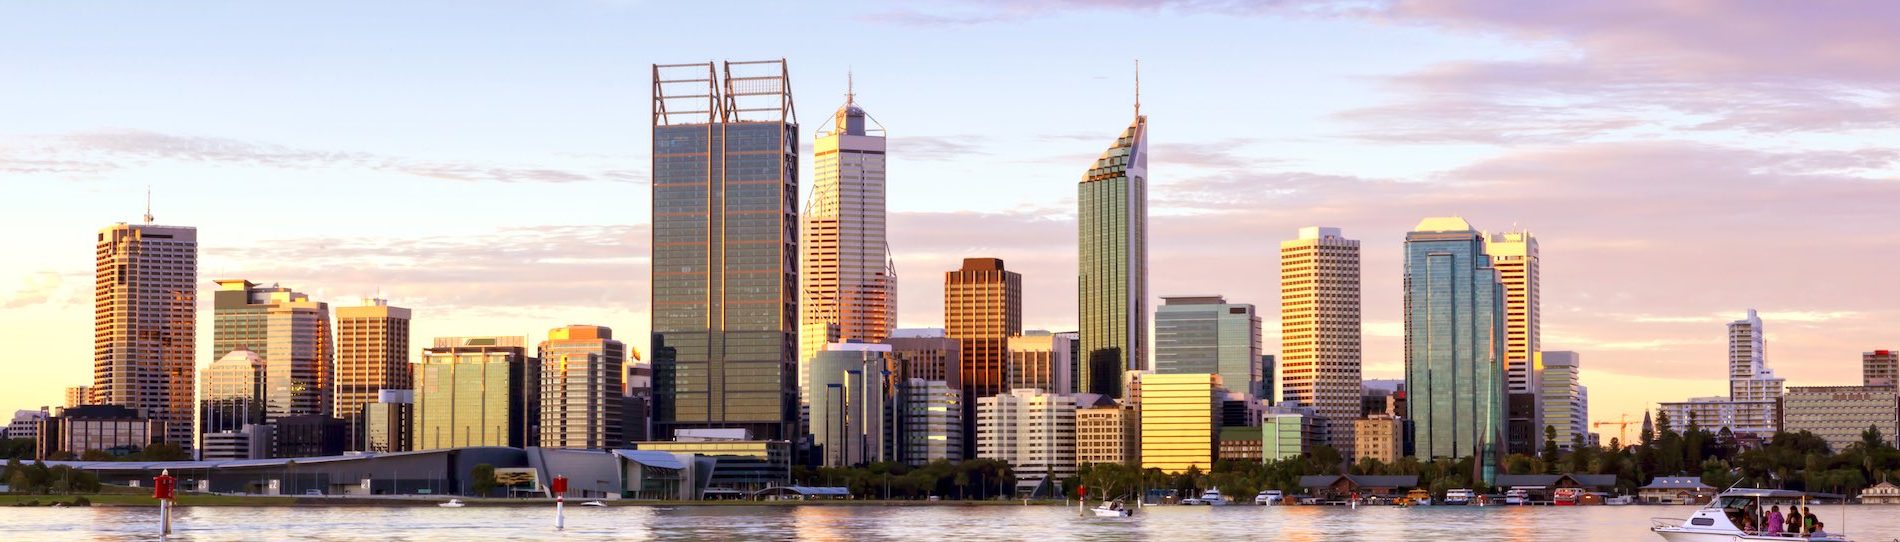 city view of perth